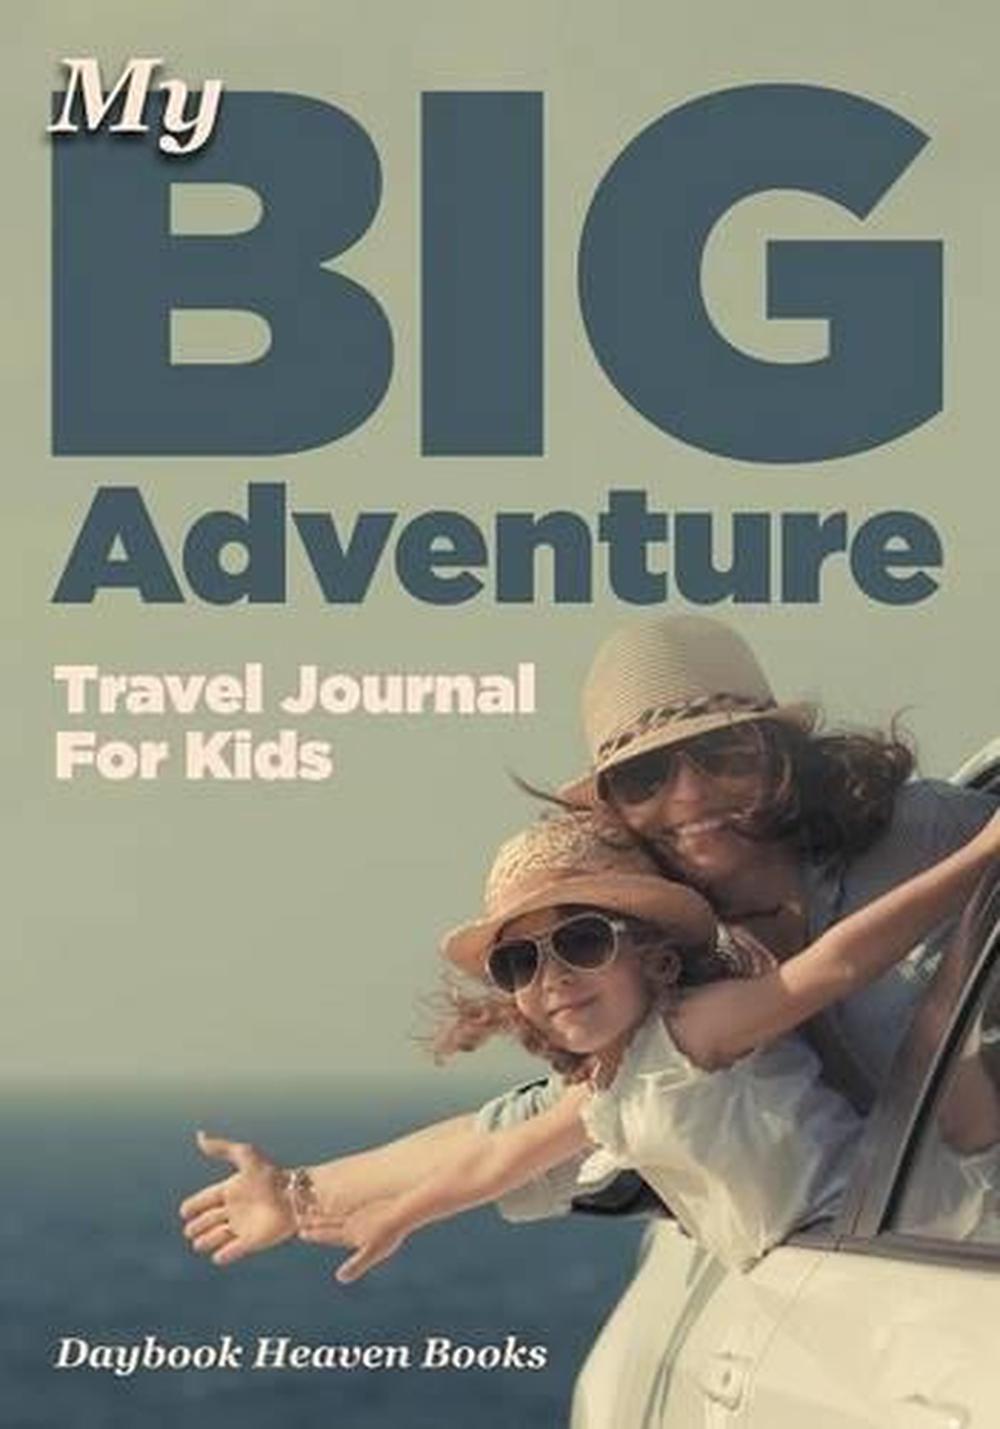 My Big Adventure Travel Journal for Kids by Daybook Heaven Books ...